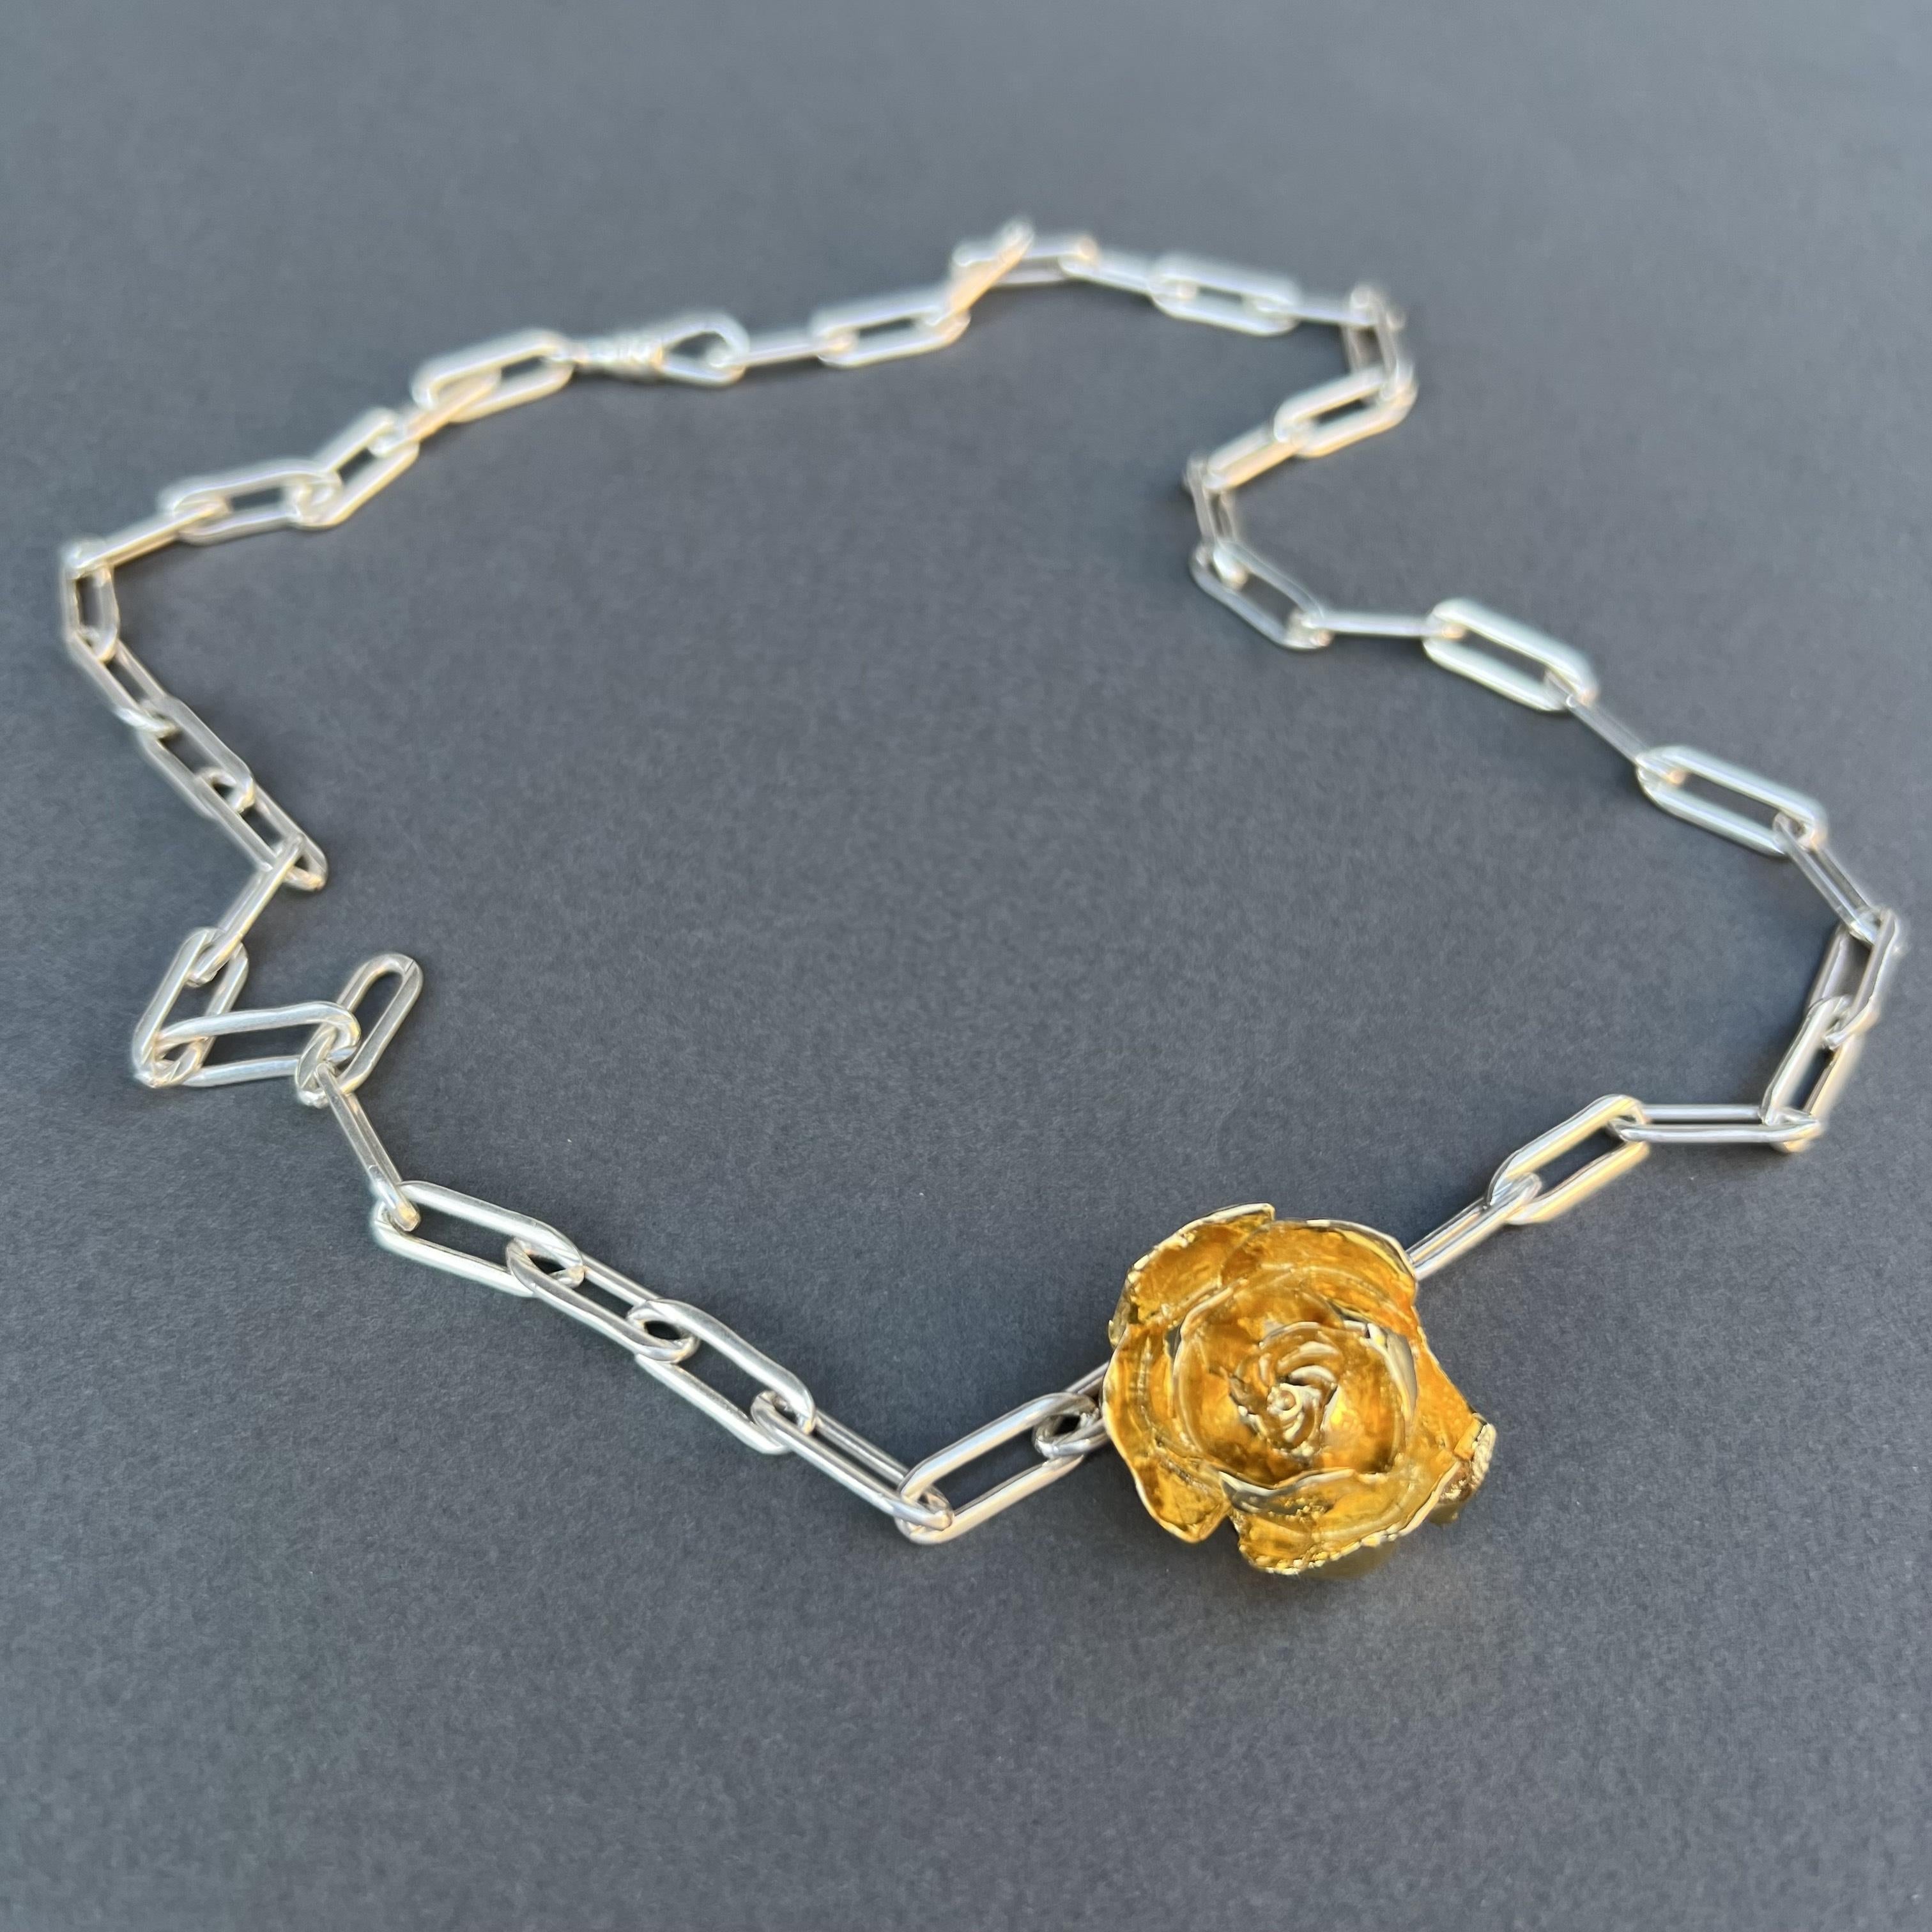 Contemporary Rose Flower Necklace Love Sterling Silver Chain J Dauphin For Sale